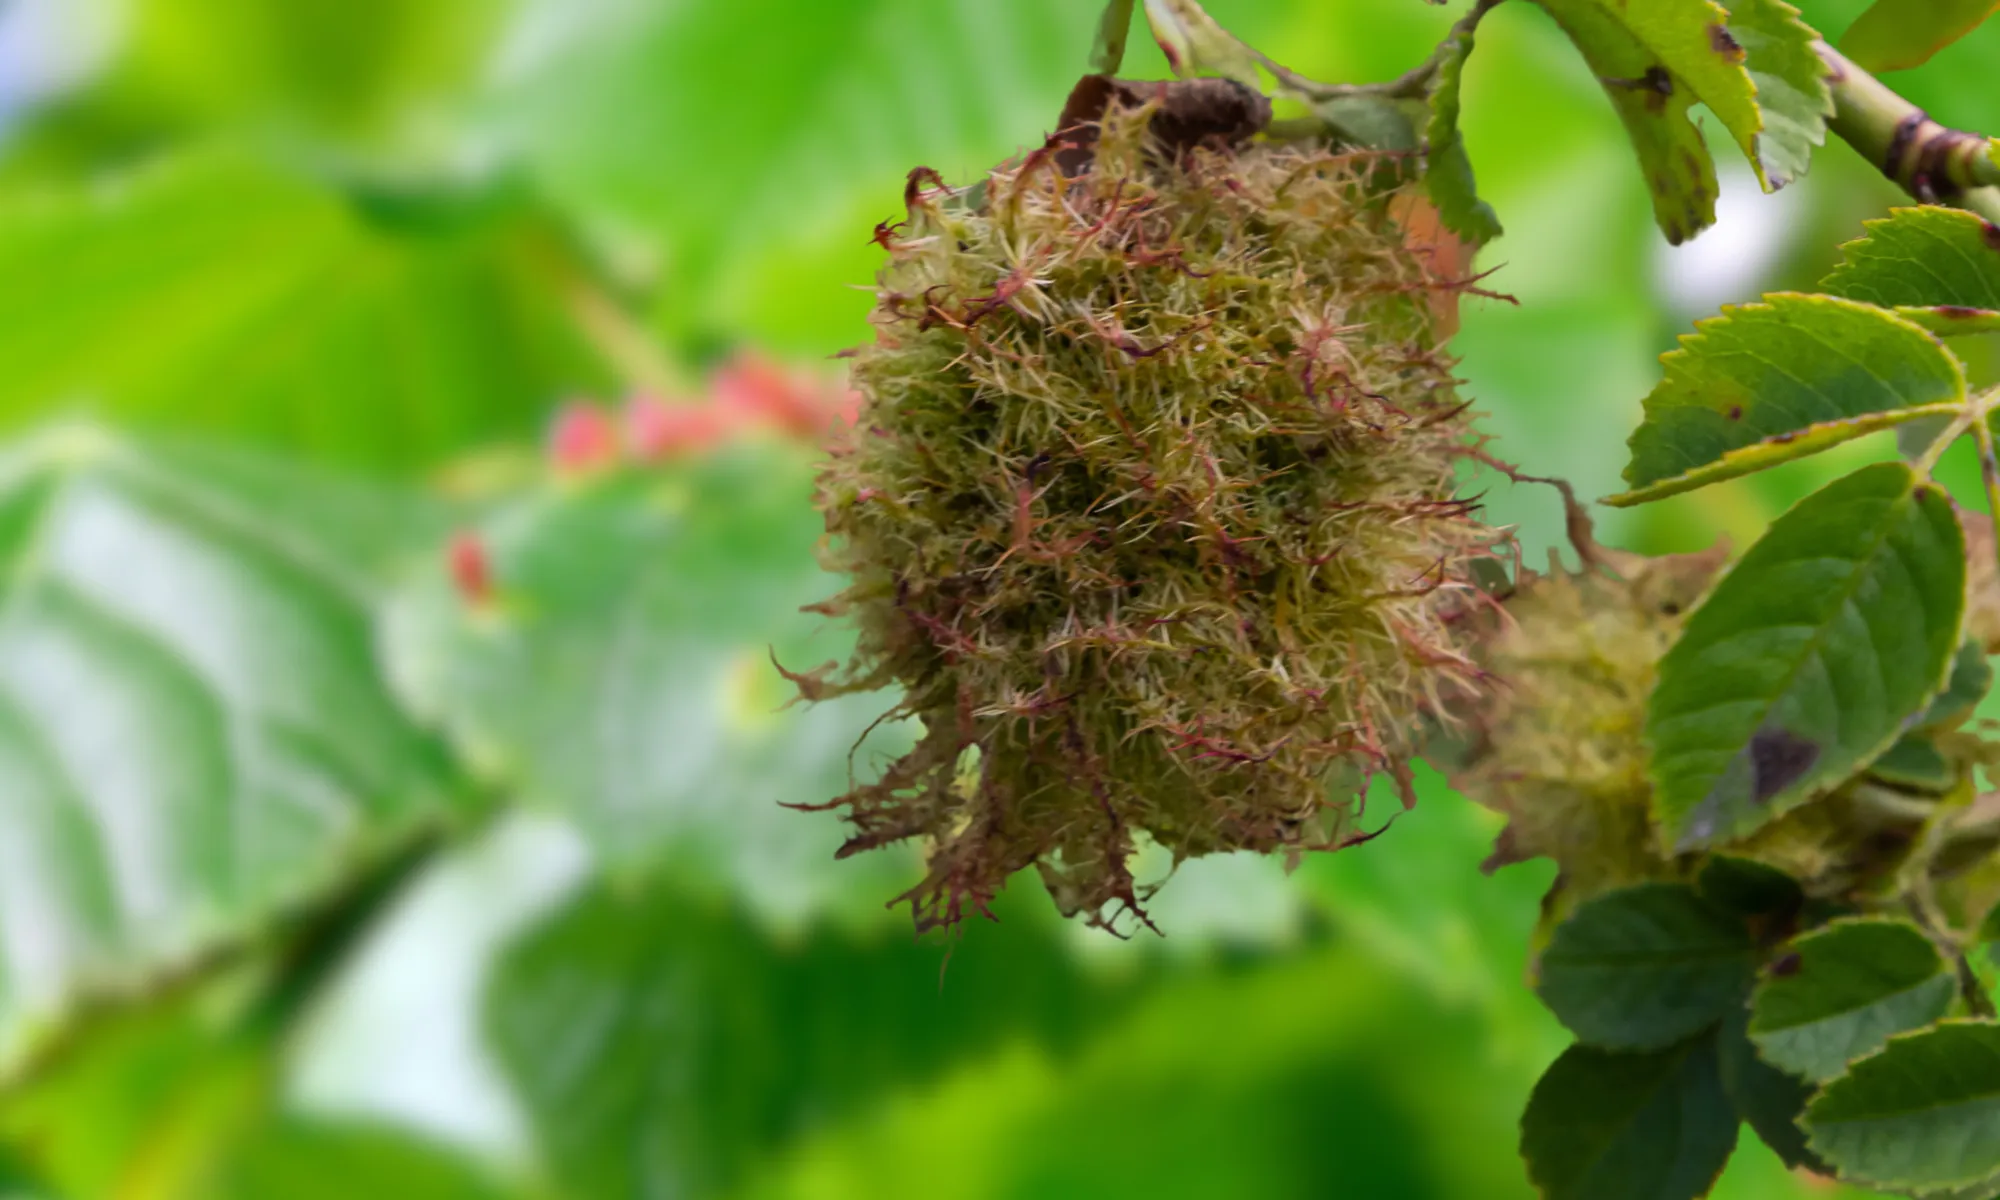 Crown Gall Close-up: An irregular growth on wild rose stems is called crow gall or rose cancer